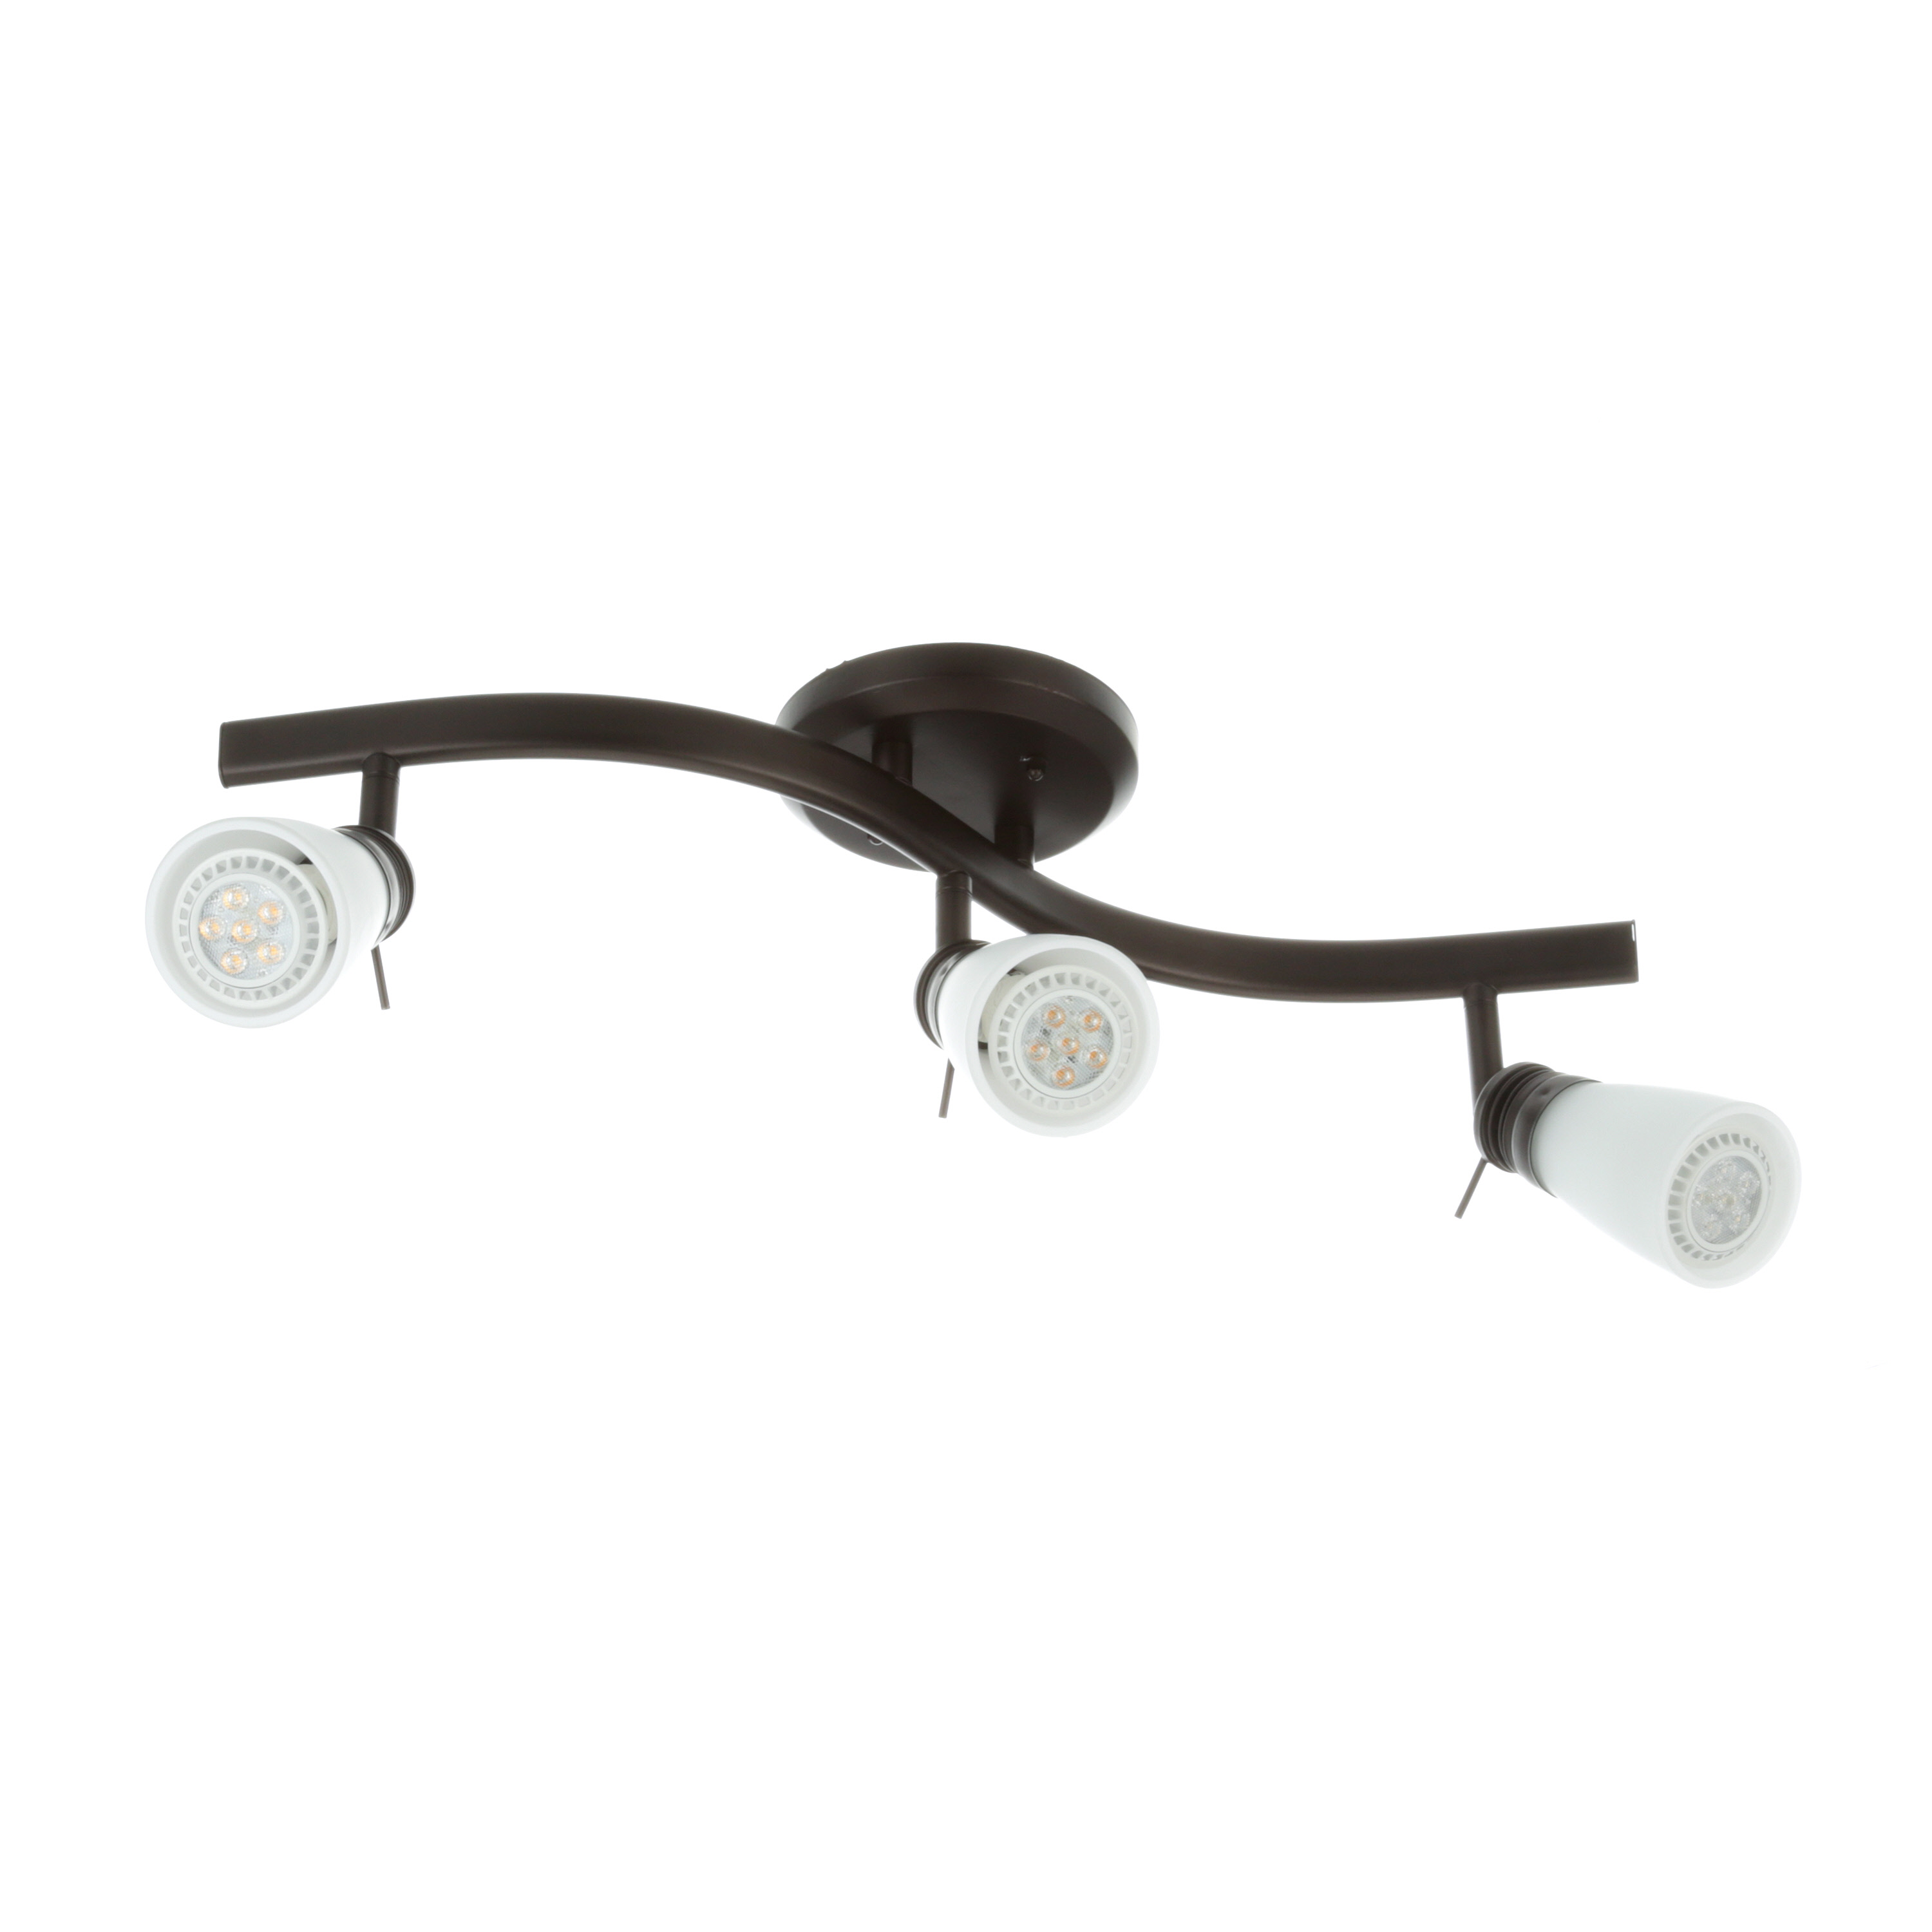 Chapter decorTrack Ceiling Light, 3 Lights, Oil-Rubbed Bronze Finish - image 2 of 5